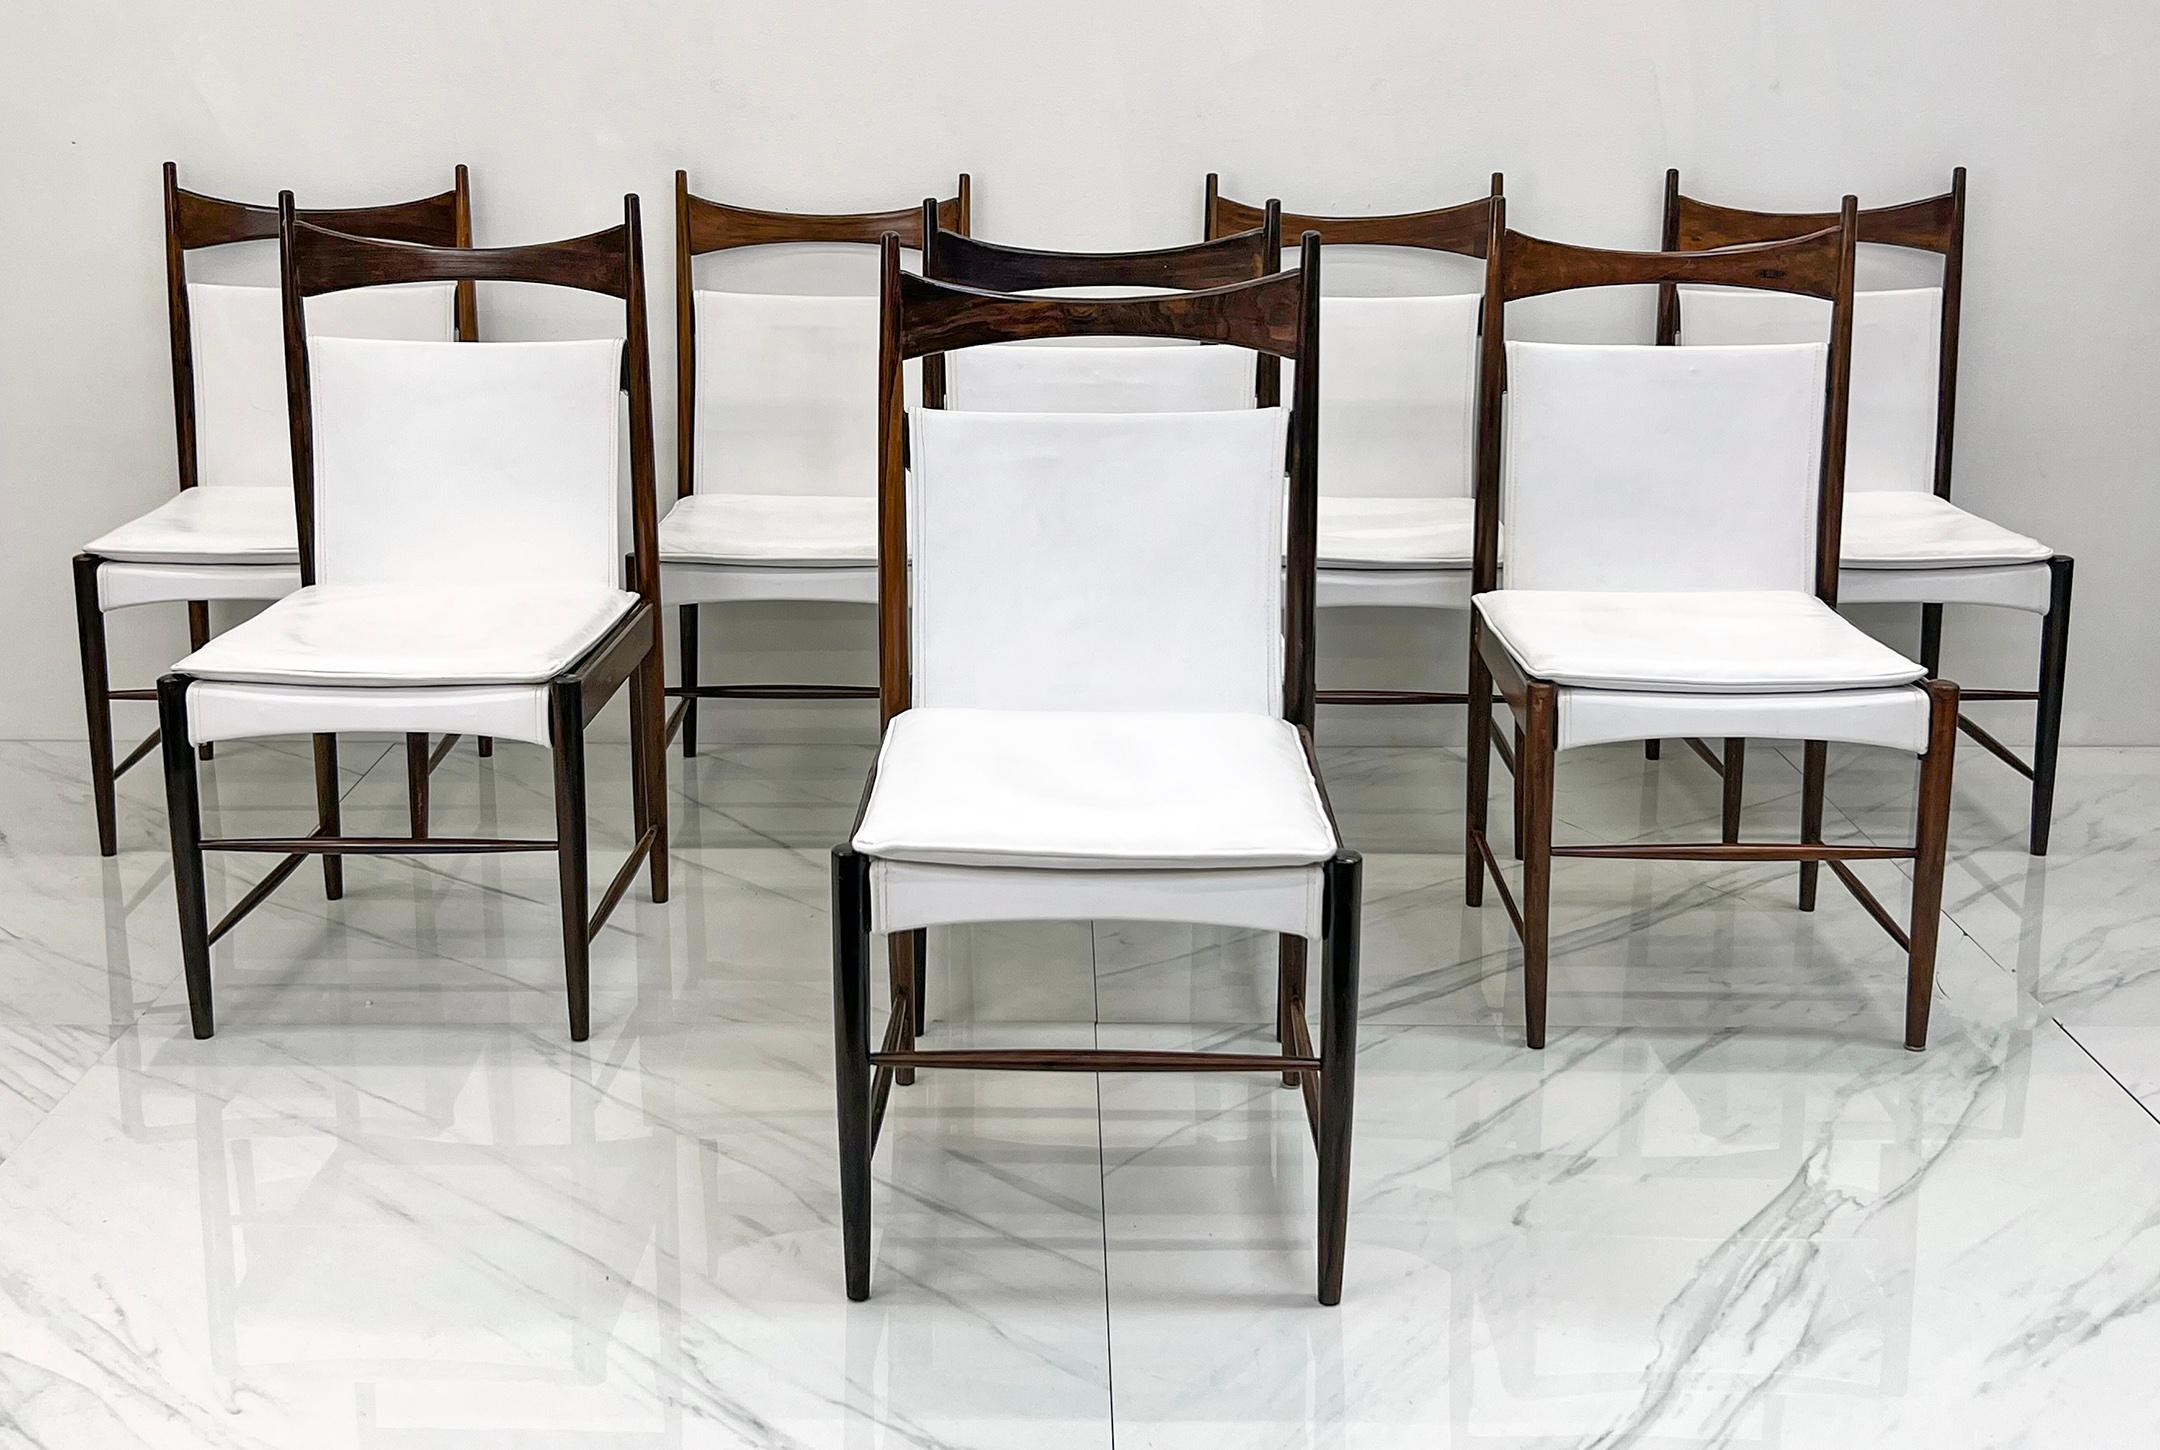 Set of 8 Rosewood Cantu Dining Chairs, Sergio Rodrigues, OCA Brazil, 1950's 3